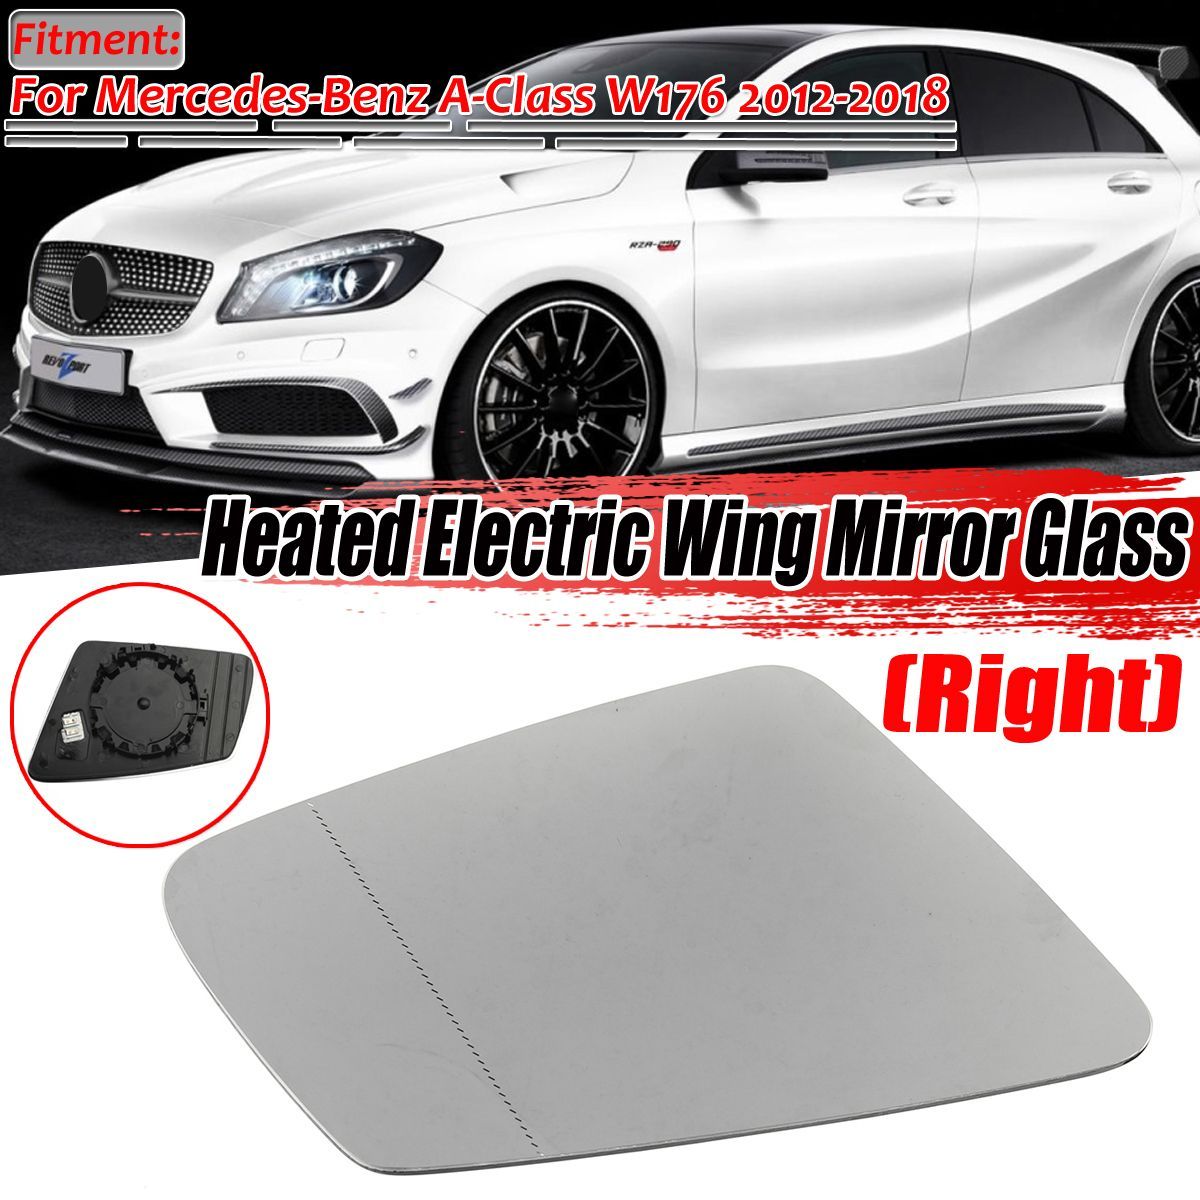 Car-Right-Heated-Electric-Wing-Mirror-Glass-For-Mercedes-Benz-A-Class-W176-2012-2018-1645451